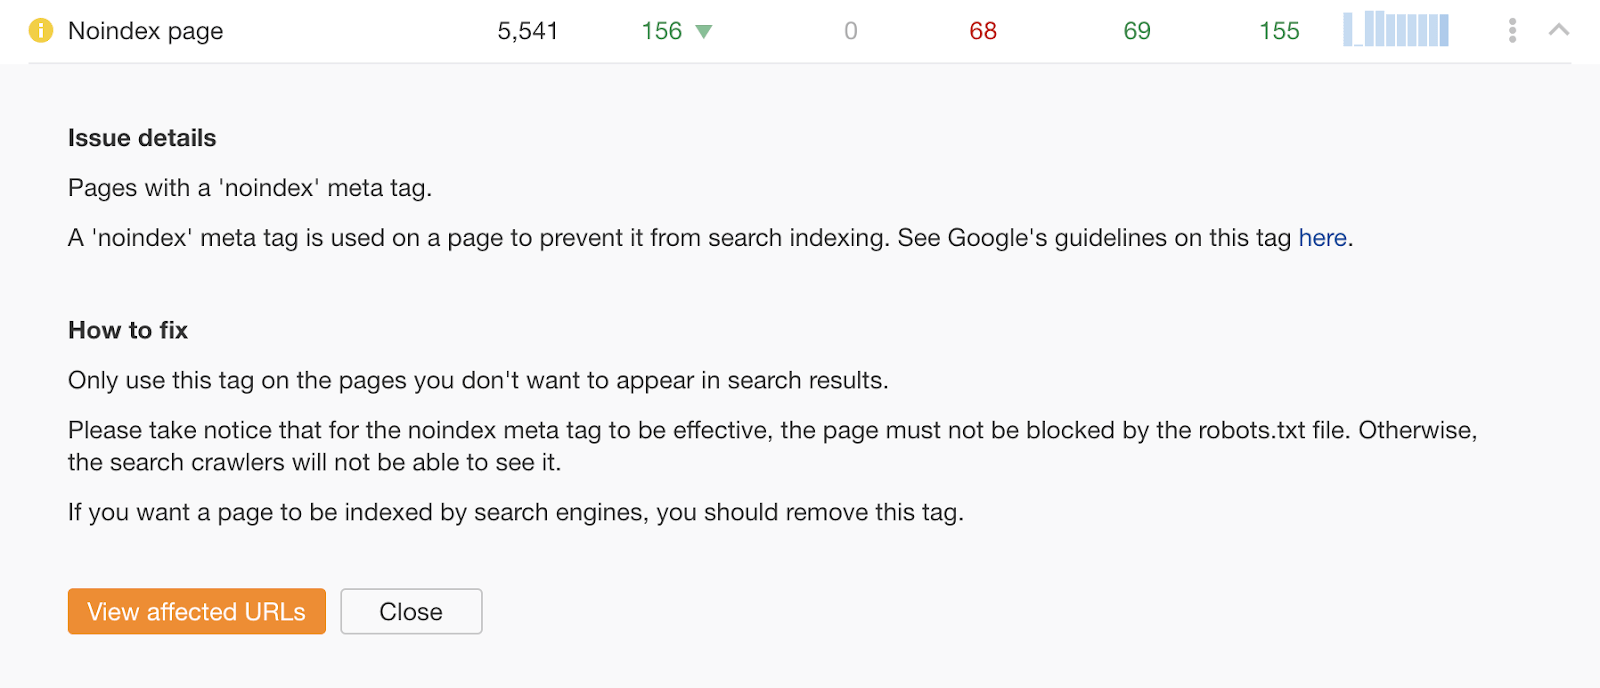 seo for startups Page showing "Noindex" meta tag issue and explanation of how to fix it